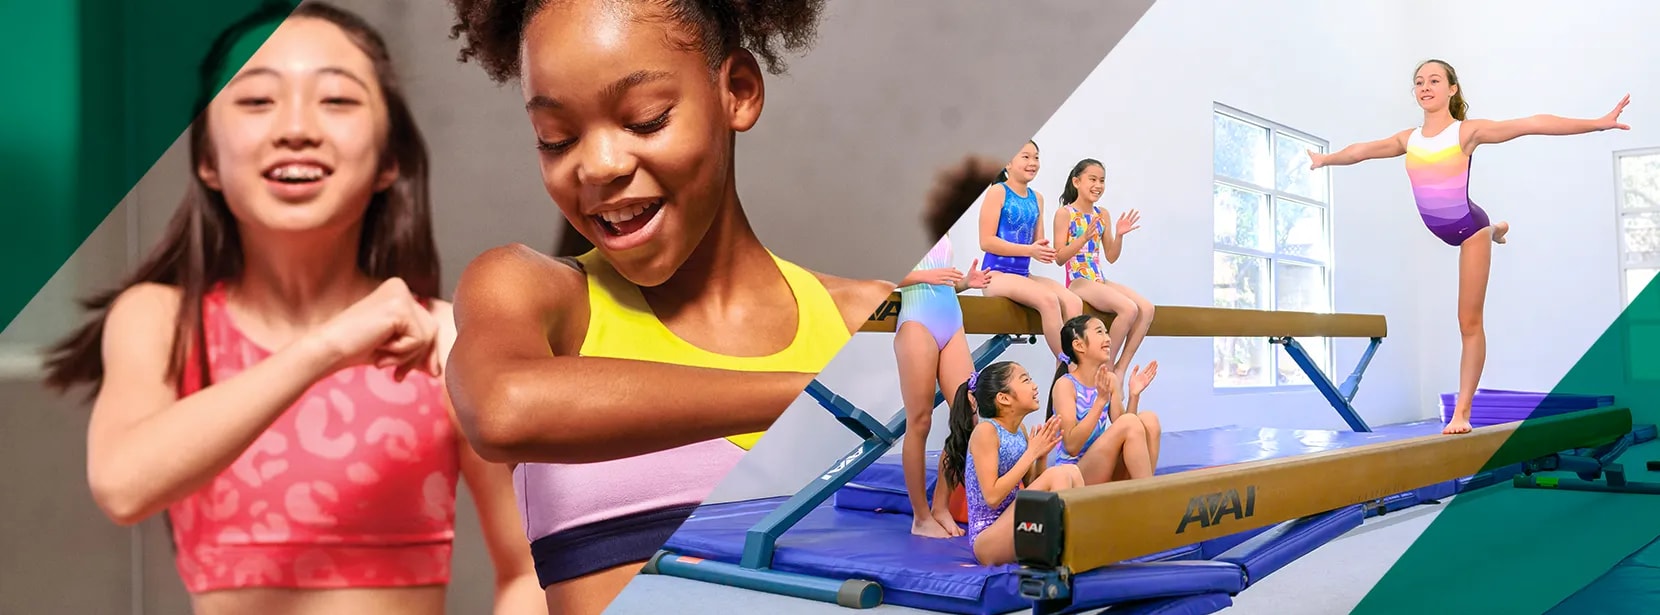 Cheer, Dance and Gymnastics Equipment and Apparel